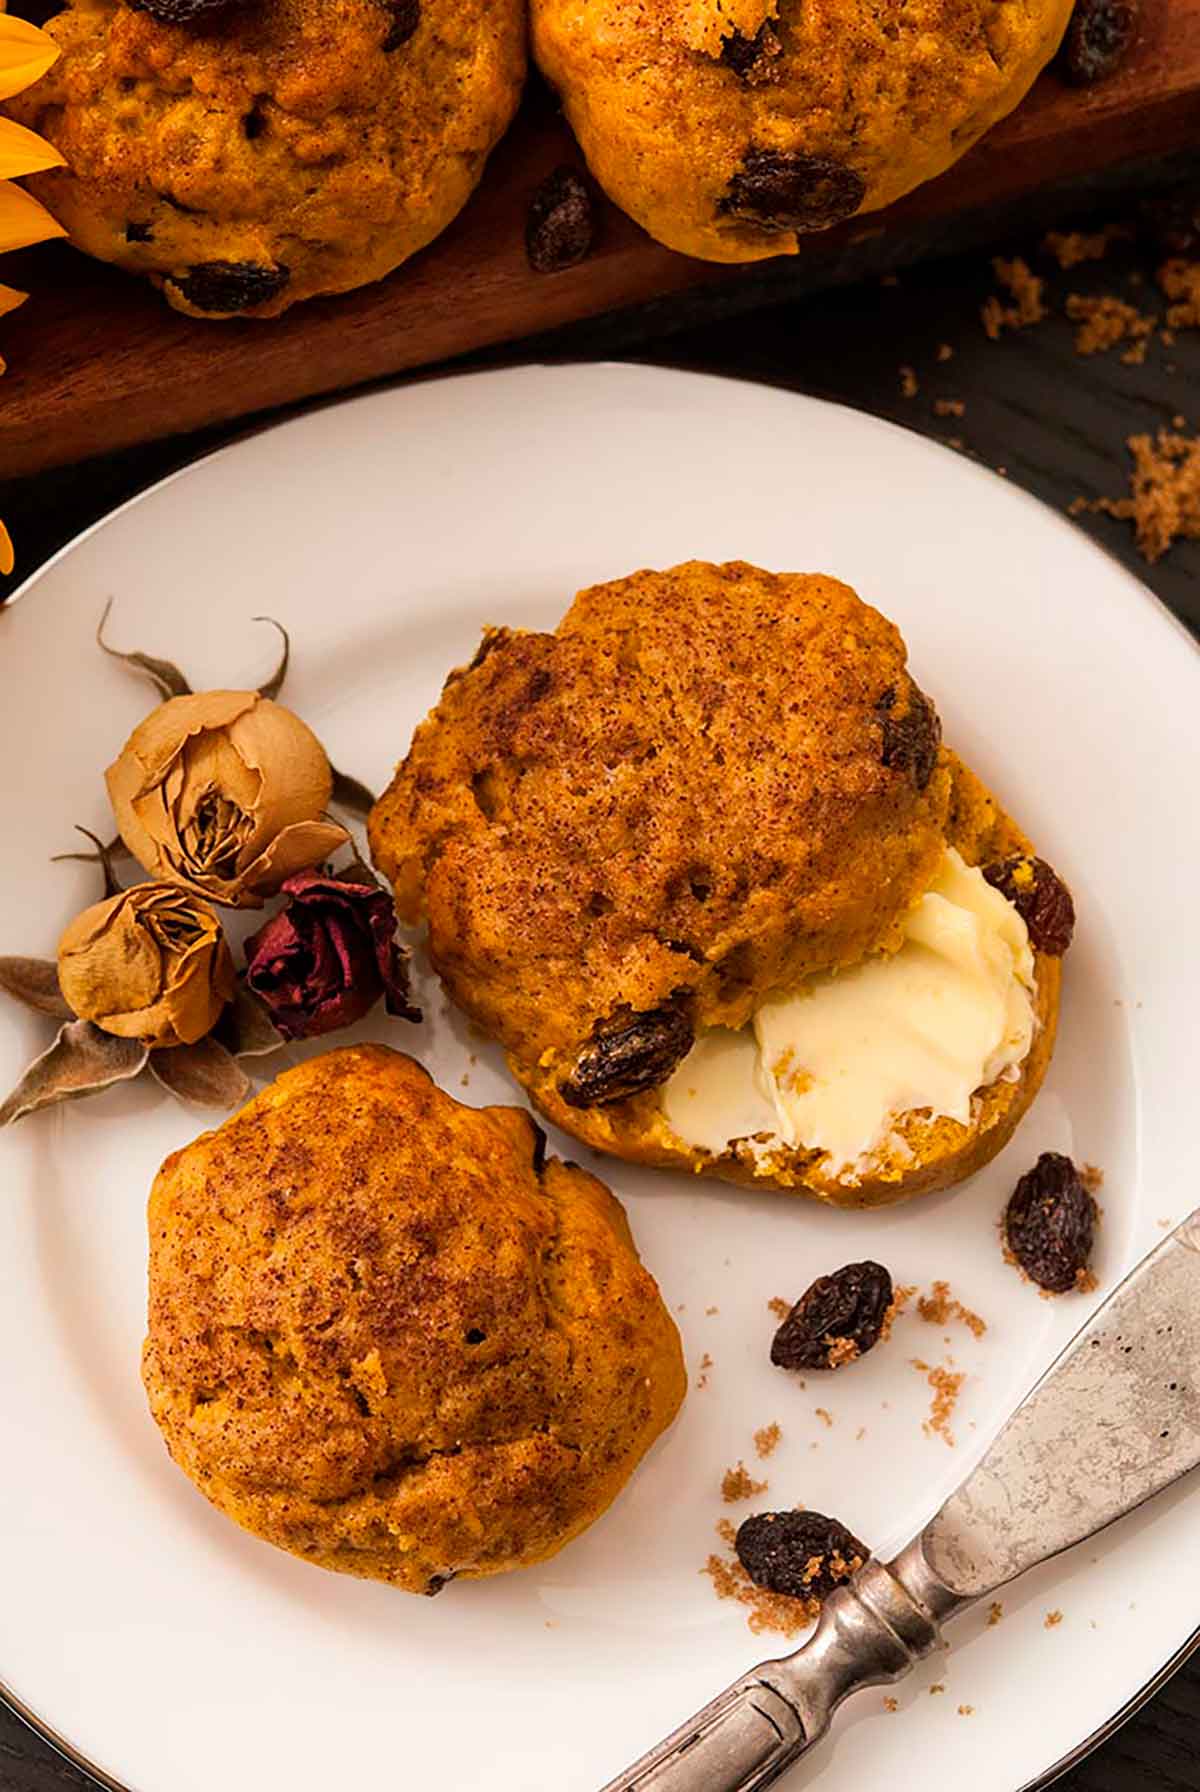 Pumpkin scones on a plate, smeared with butter - the plate is garnished with raisins and a few dry roses.